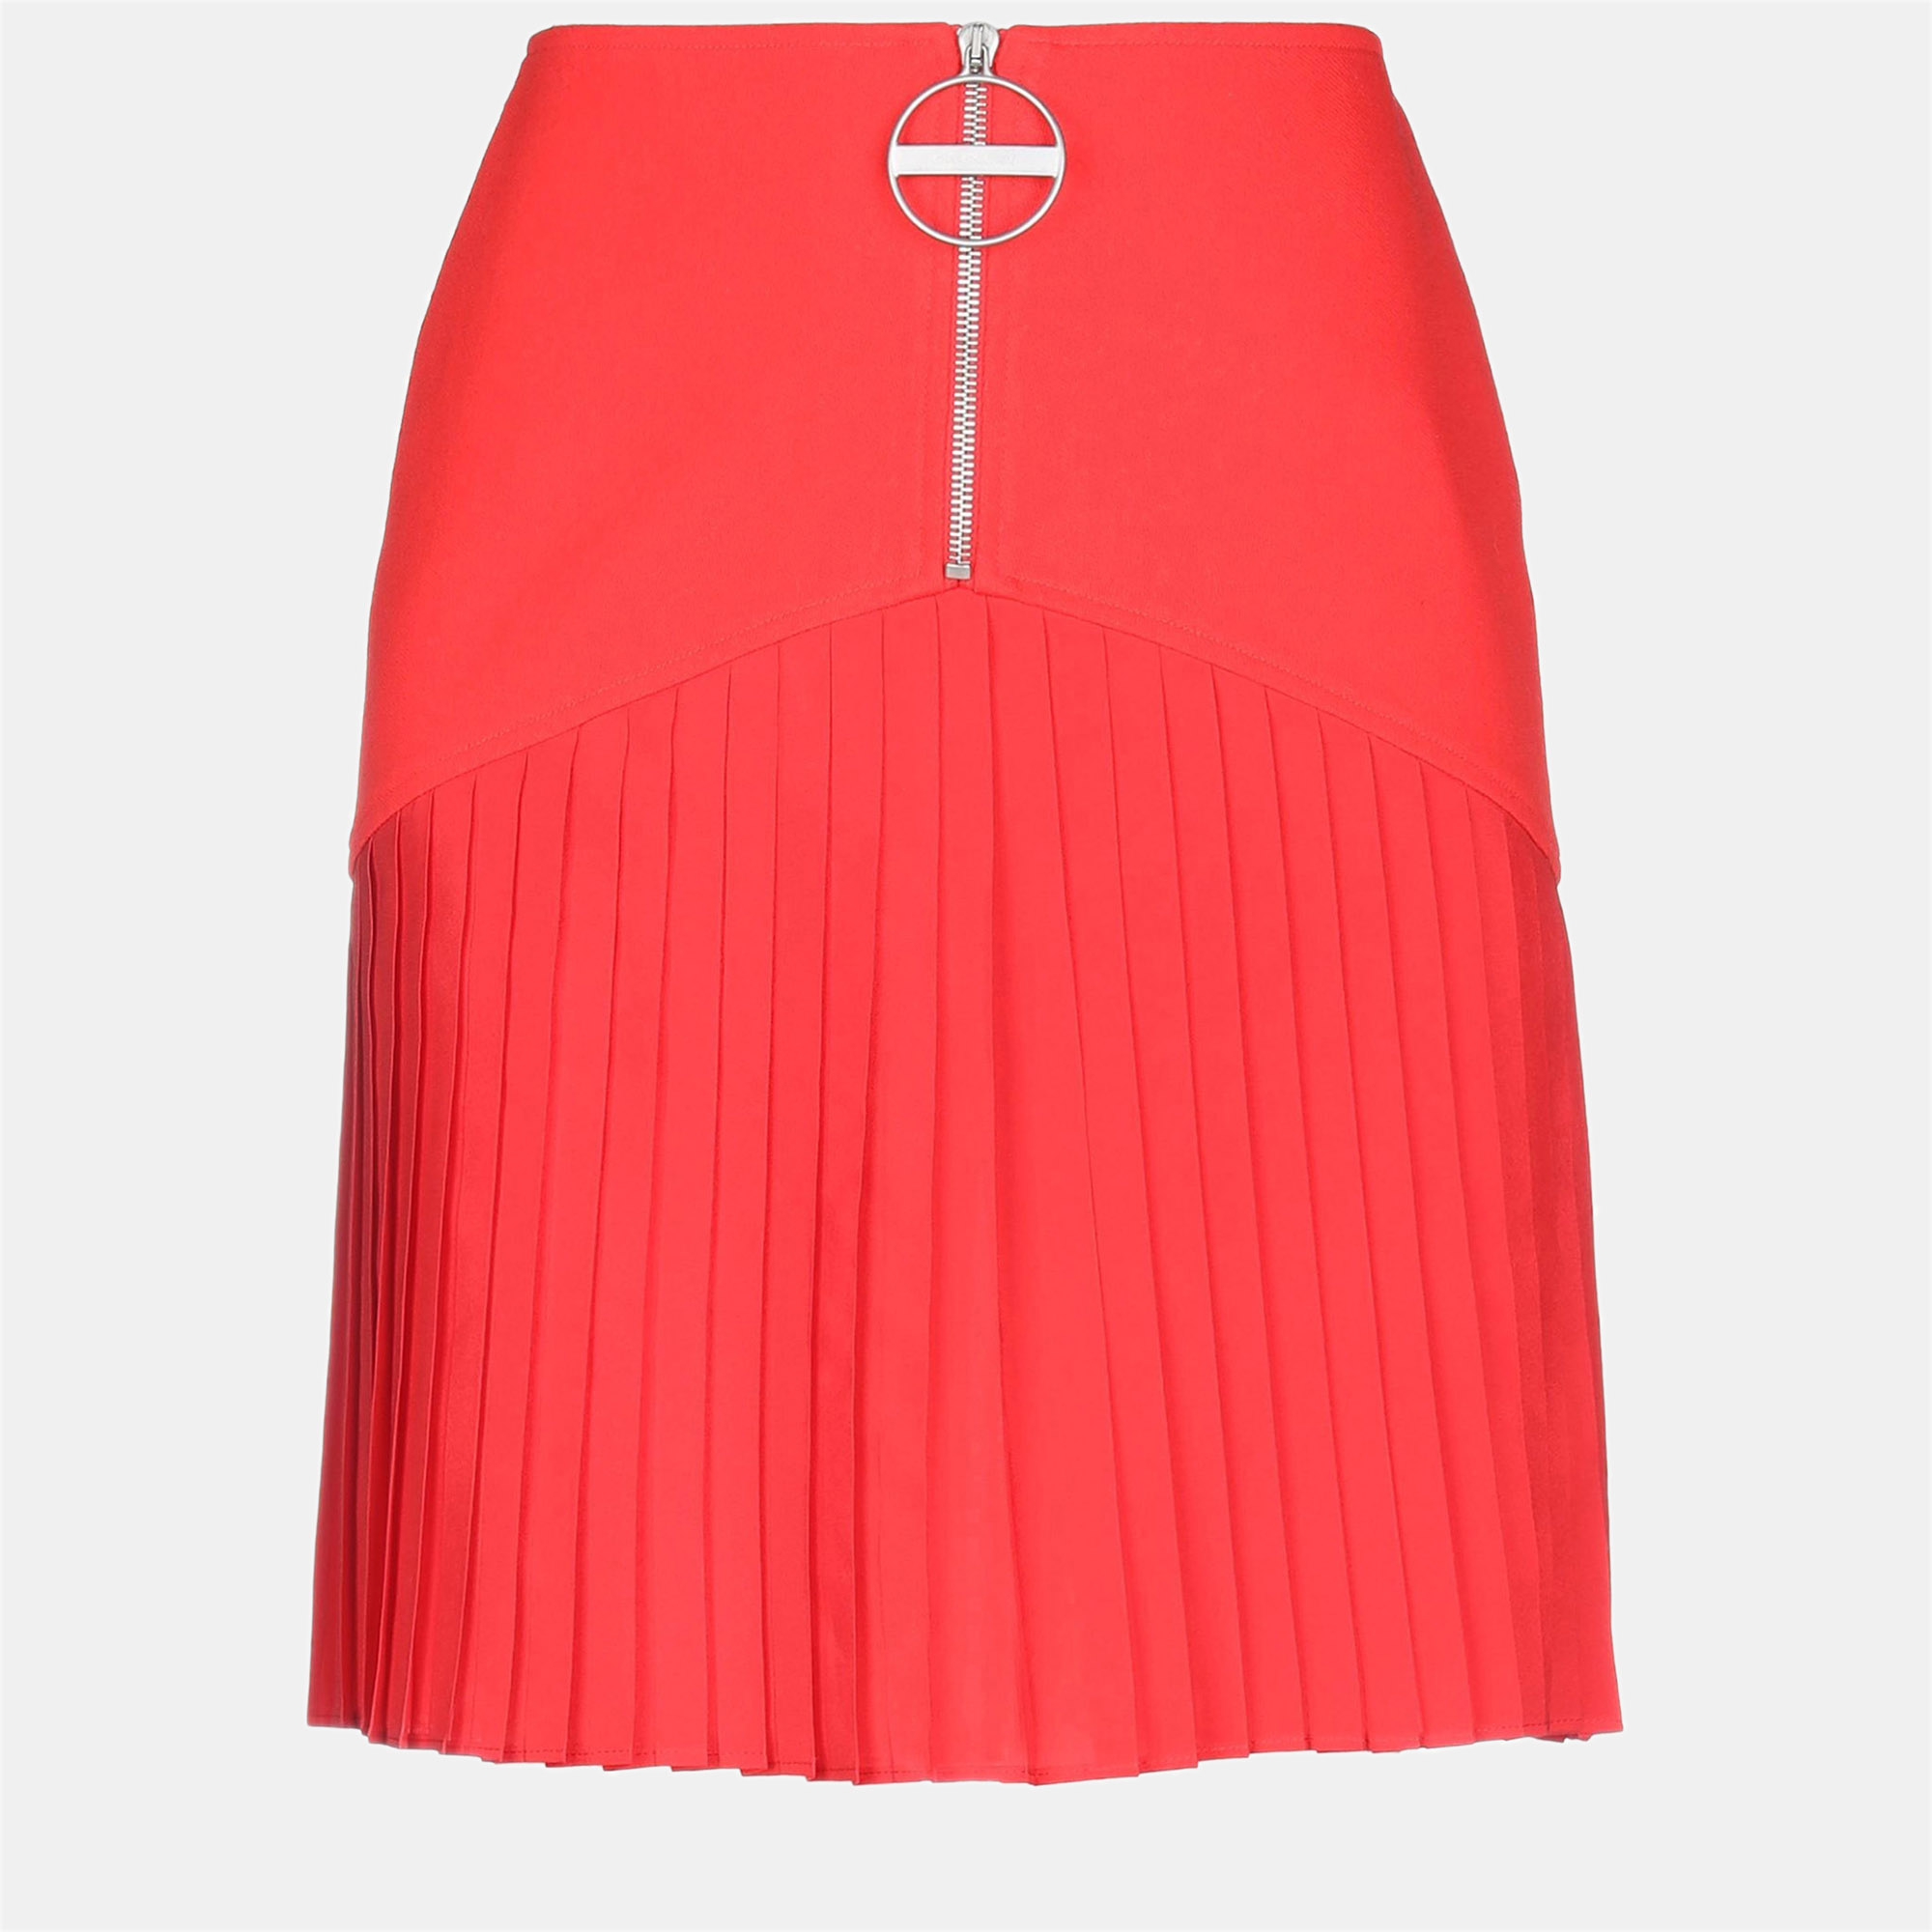 Givenchy red wool midi skirt size 38